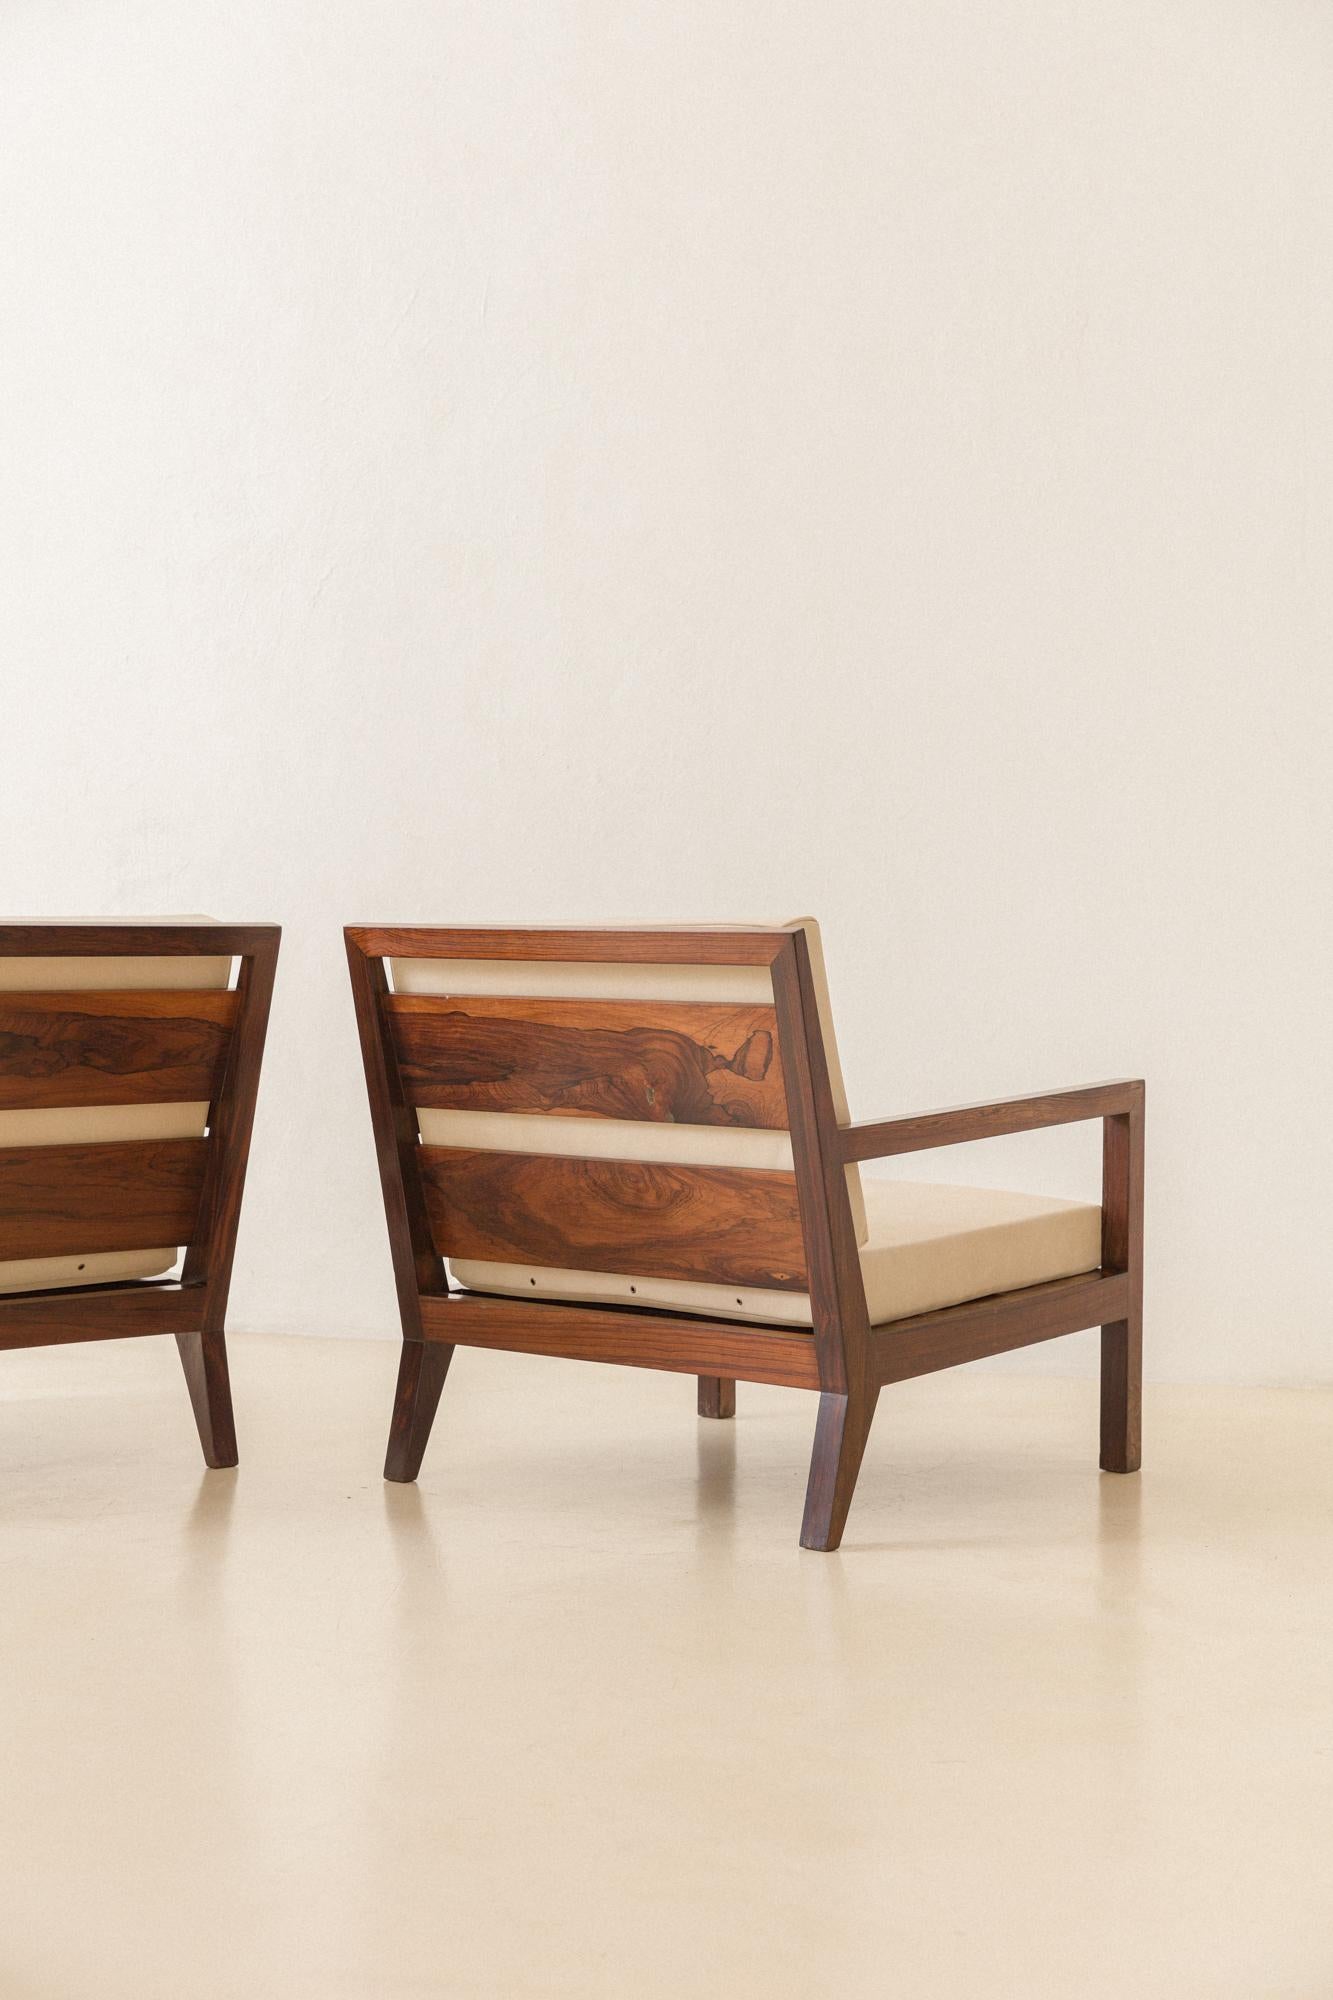 Pair of Brazilian Midcentury Armchairs, Unknown Designer, Solid Rosewood, 1960s For Sale 4